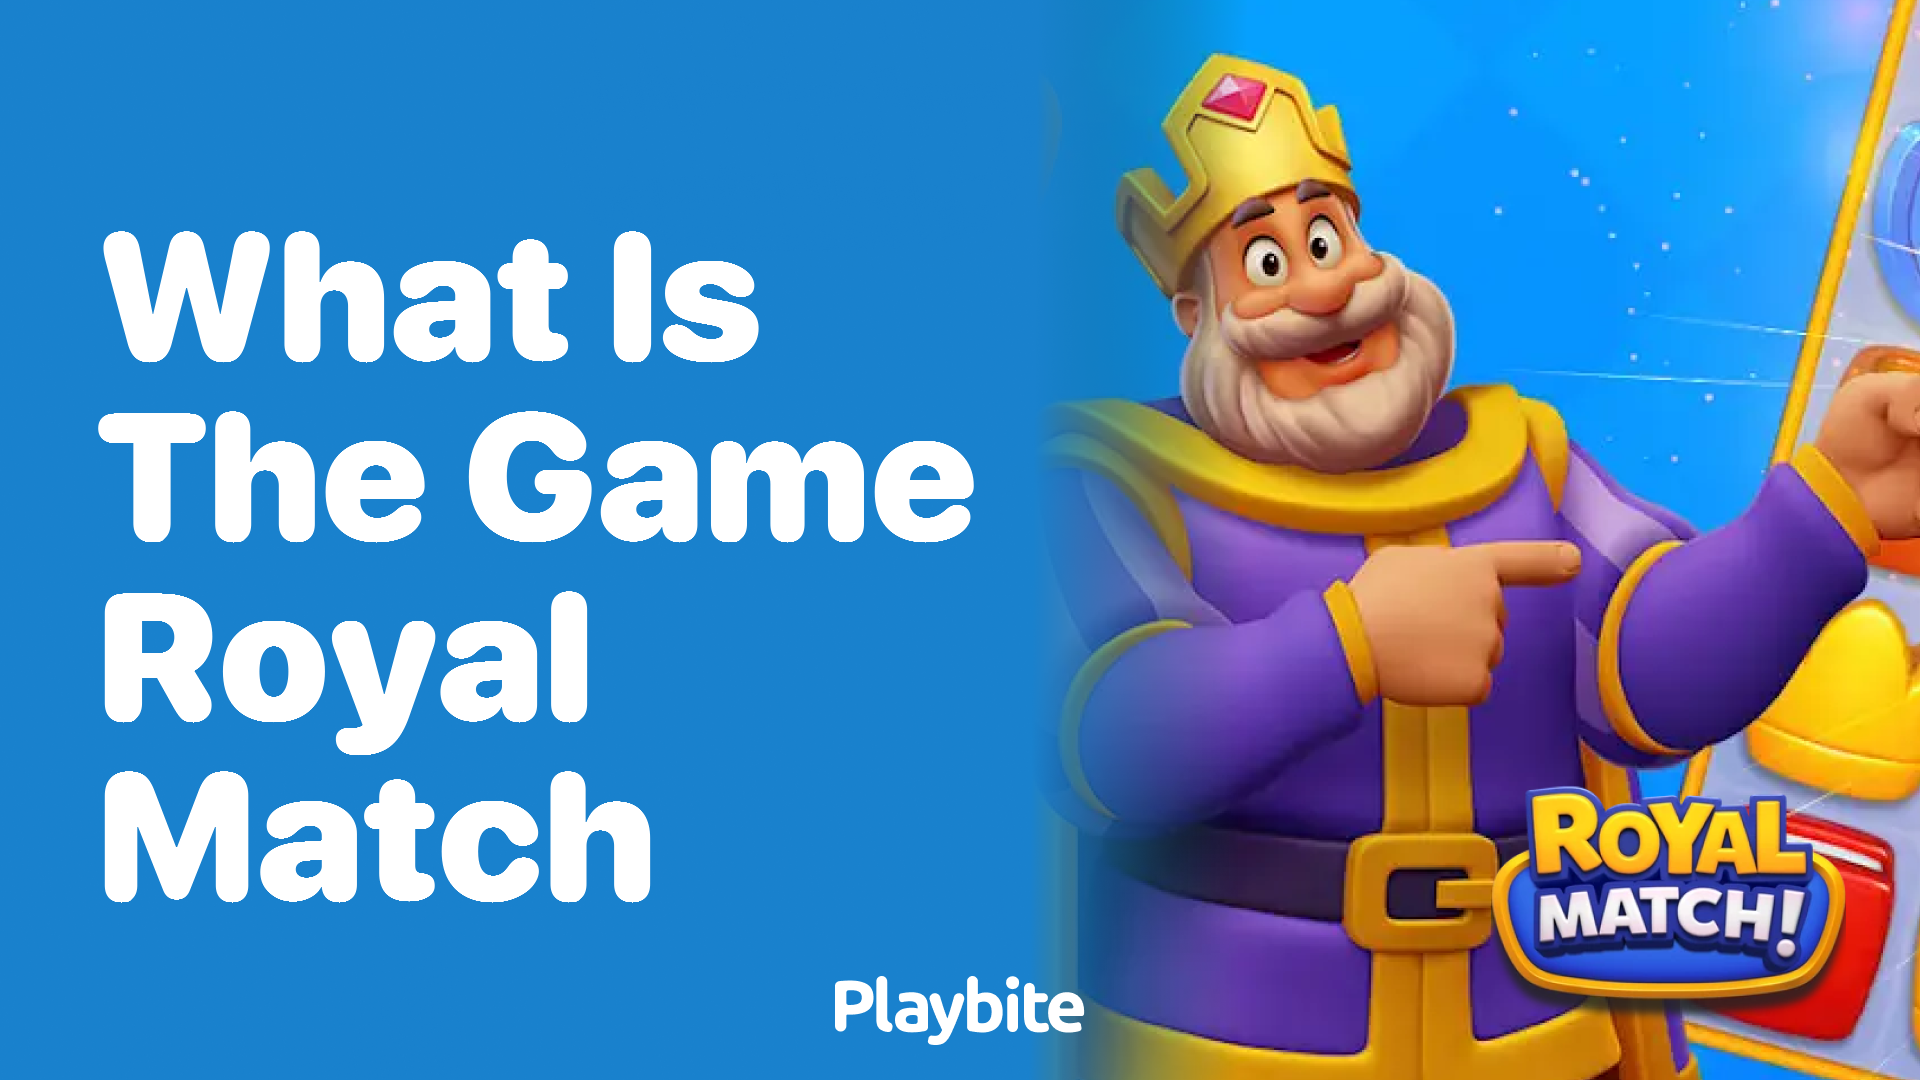 What is the game Royal Match?